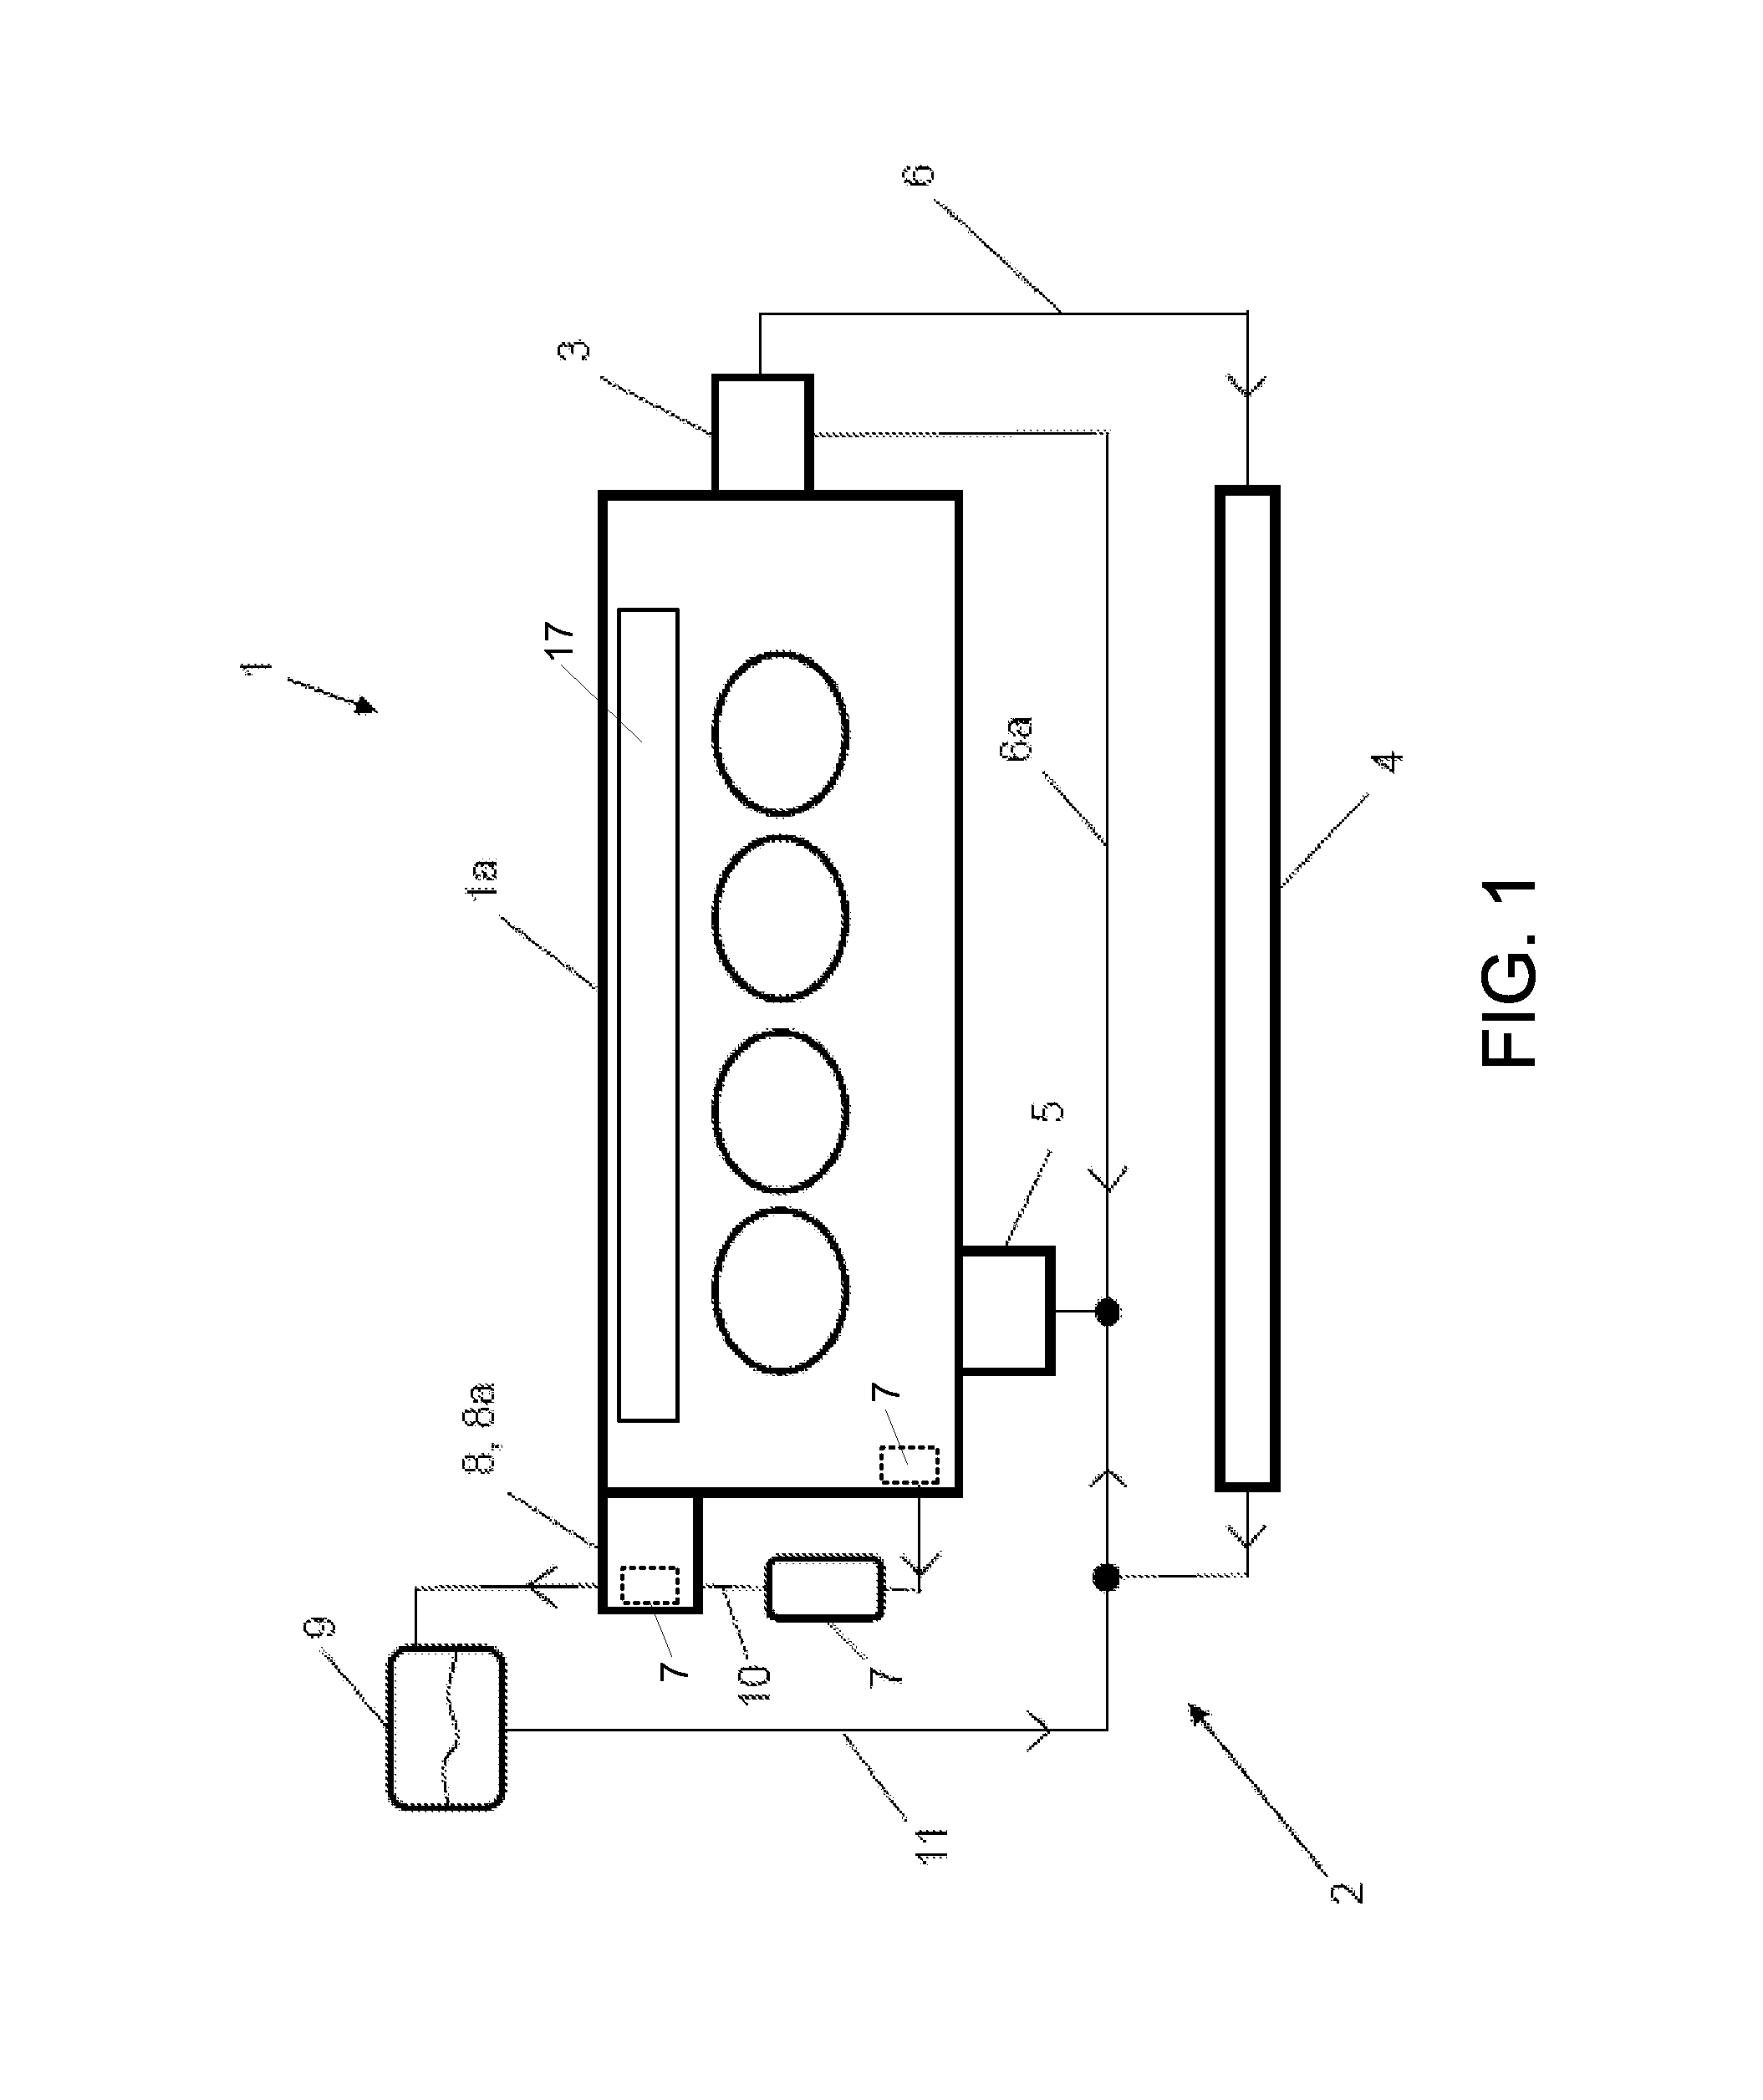 Liquid-cooled internal combustion engine with afterrun cooling, and method for operating an internal combustion engine of said type